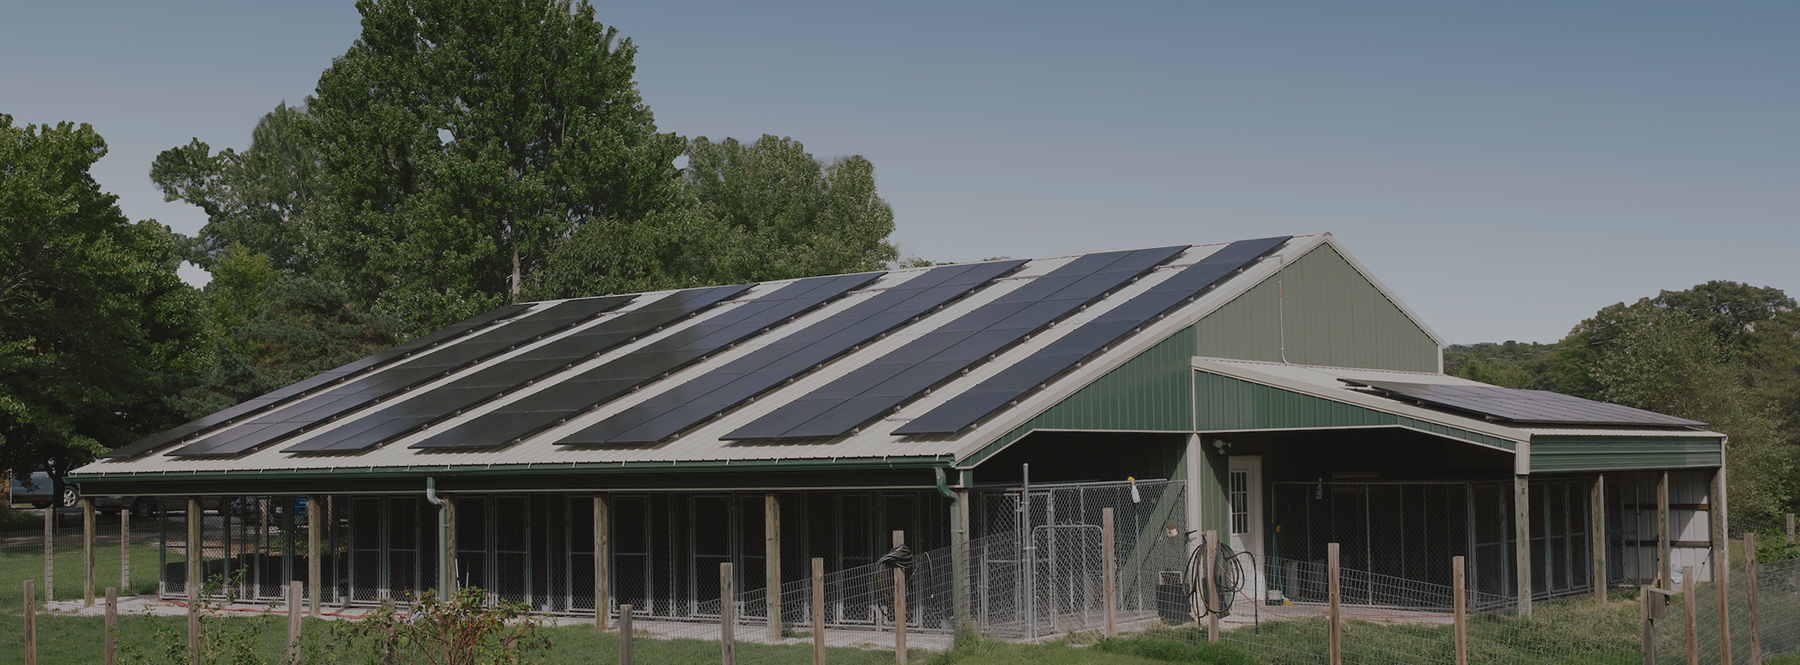 A large, green steel building with a large array of roof-mounted solar panels.